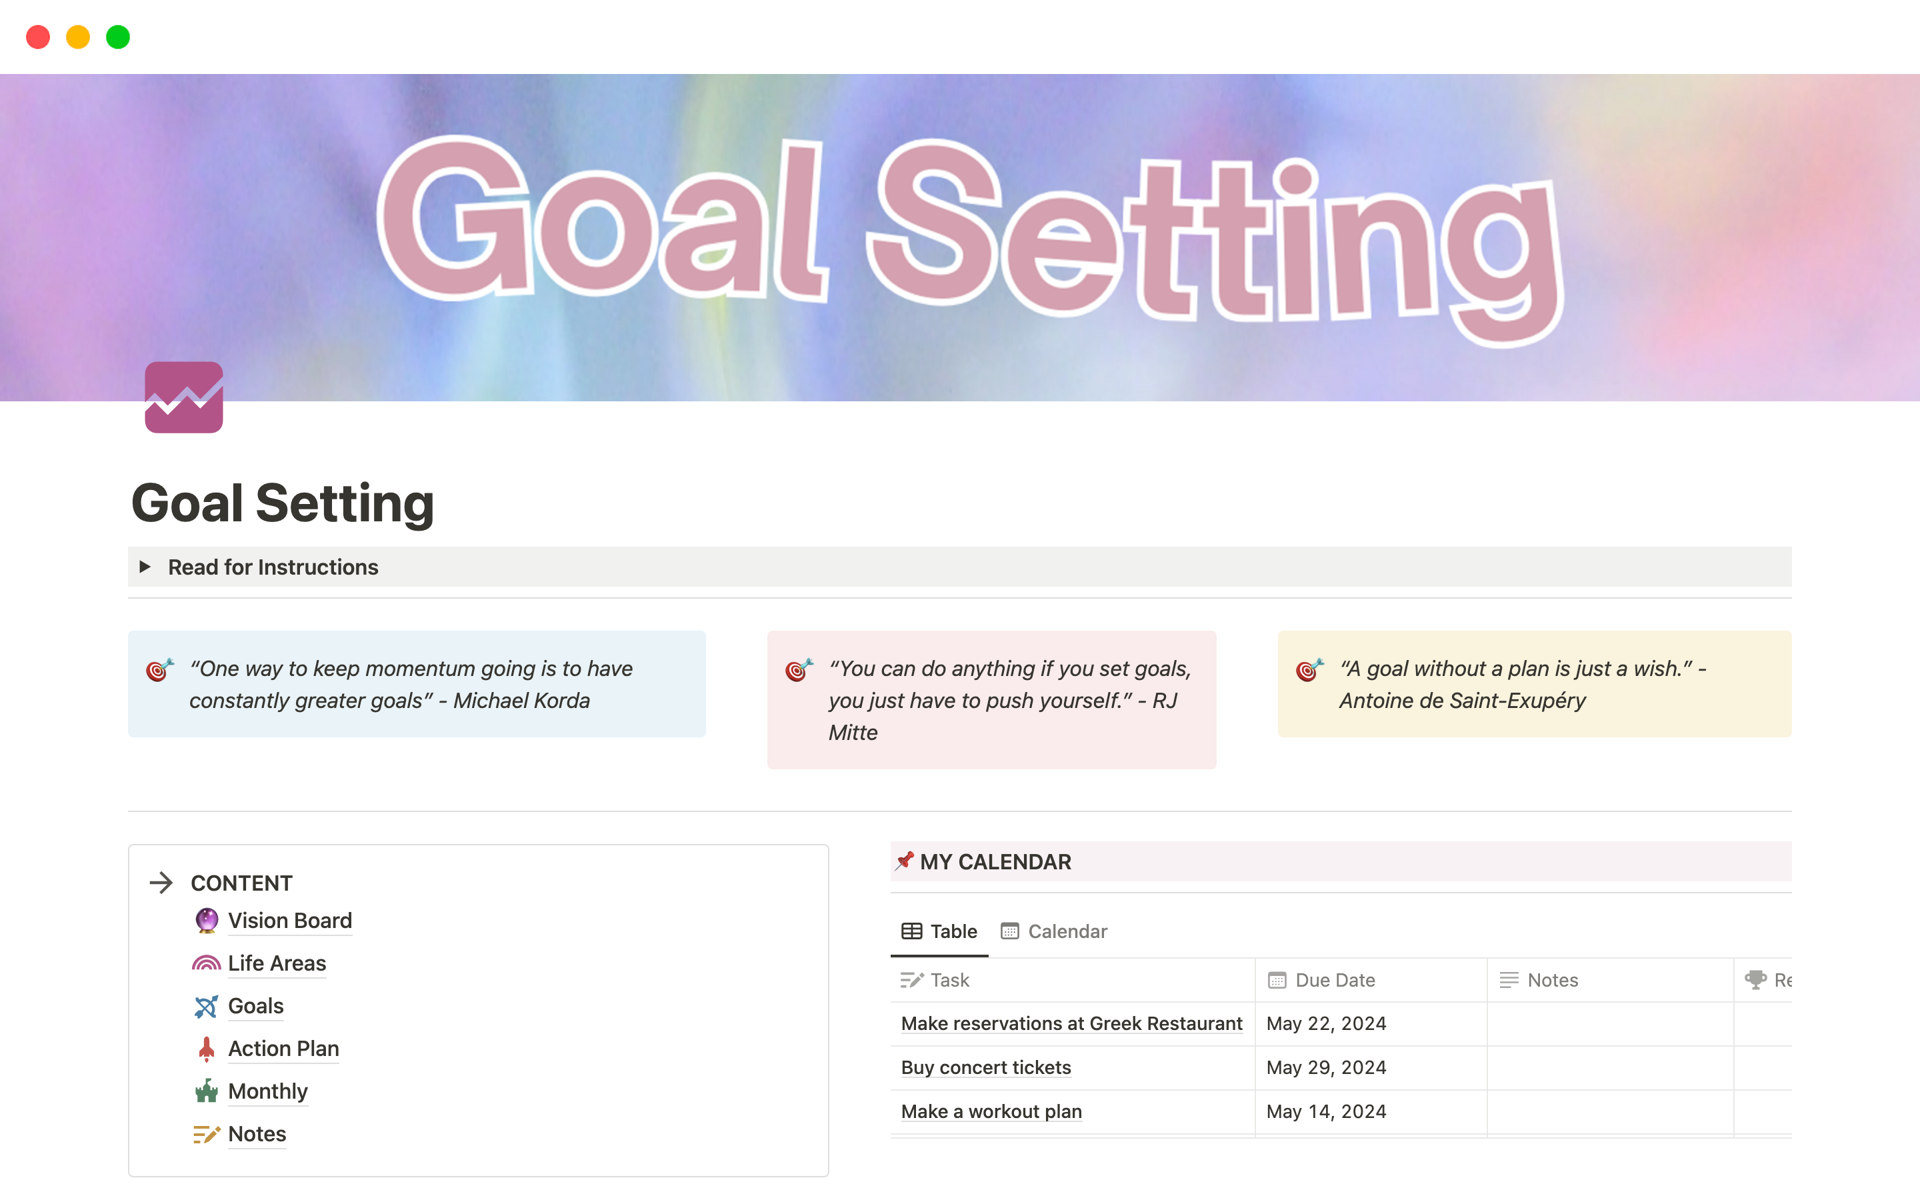 Start living your best life now by setting yourself achievable goals with the Notion Goal Setting Dashboard 🎯. Plan, organise and track your goal progress for all areas of your life!
